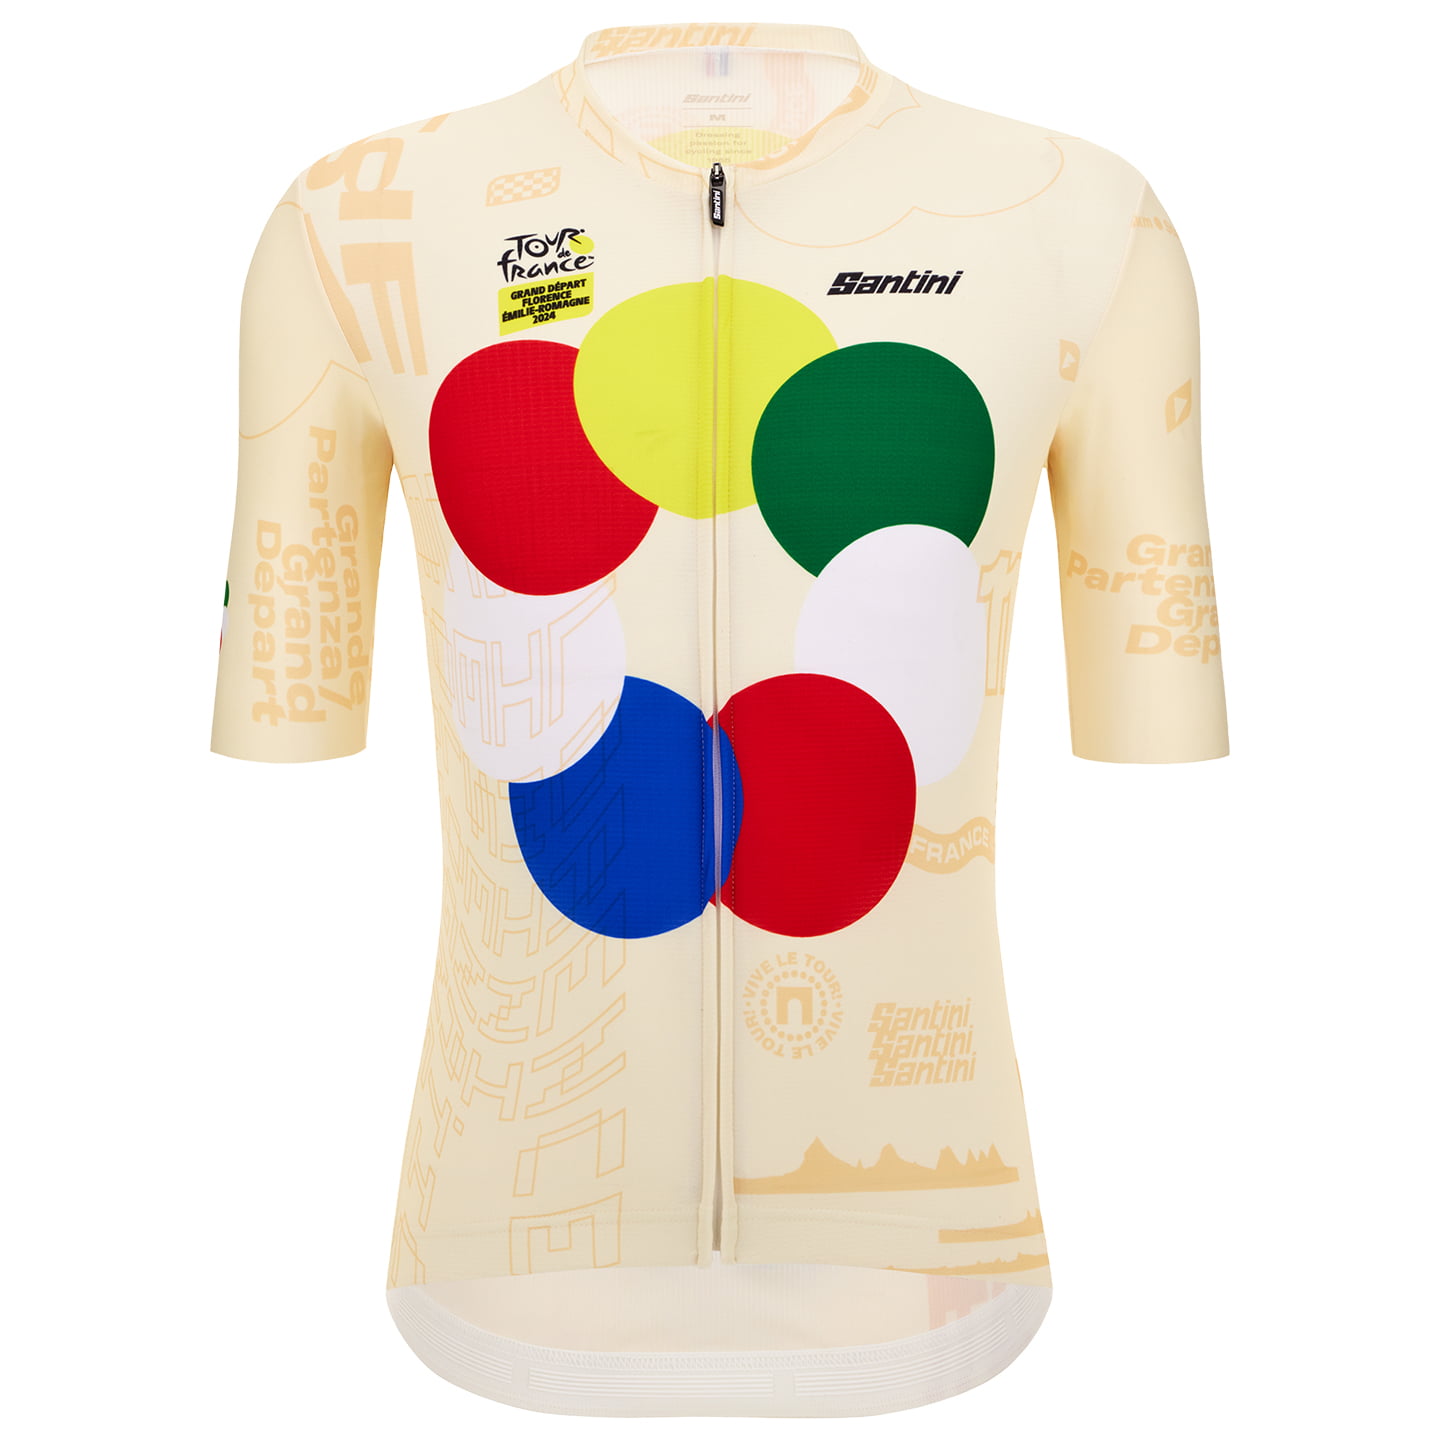 TOUR DE FRANCE Grand Depart Florence 2024 Short Sleeve Jersey, for men, size M, Cycle jersey, Cycling clothing